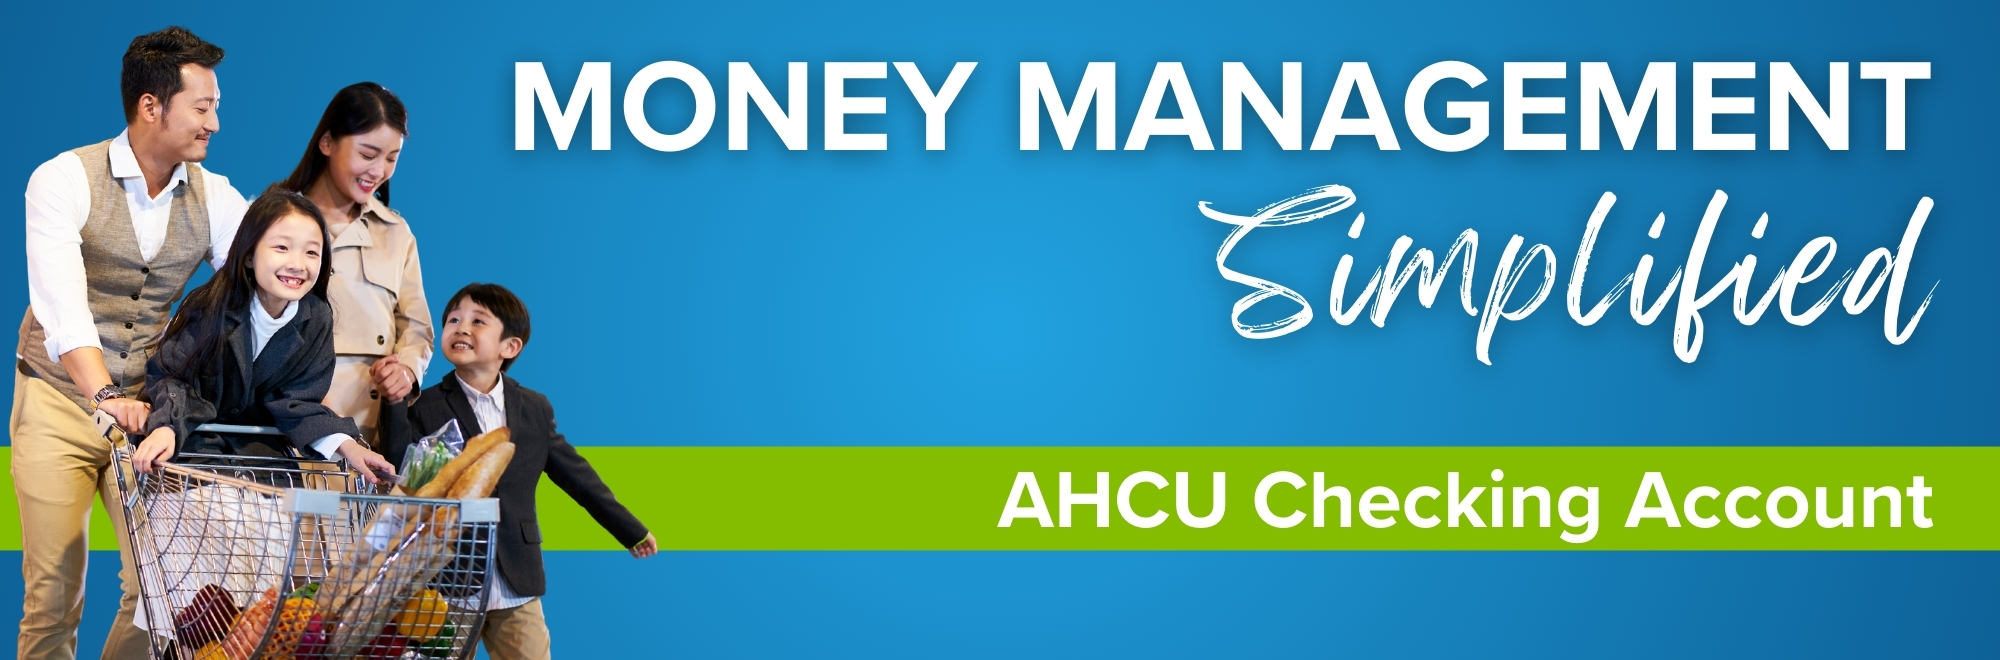 Money management simplified with AHCU's Checking account